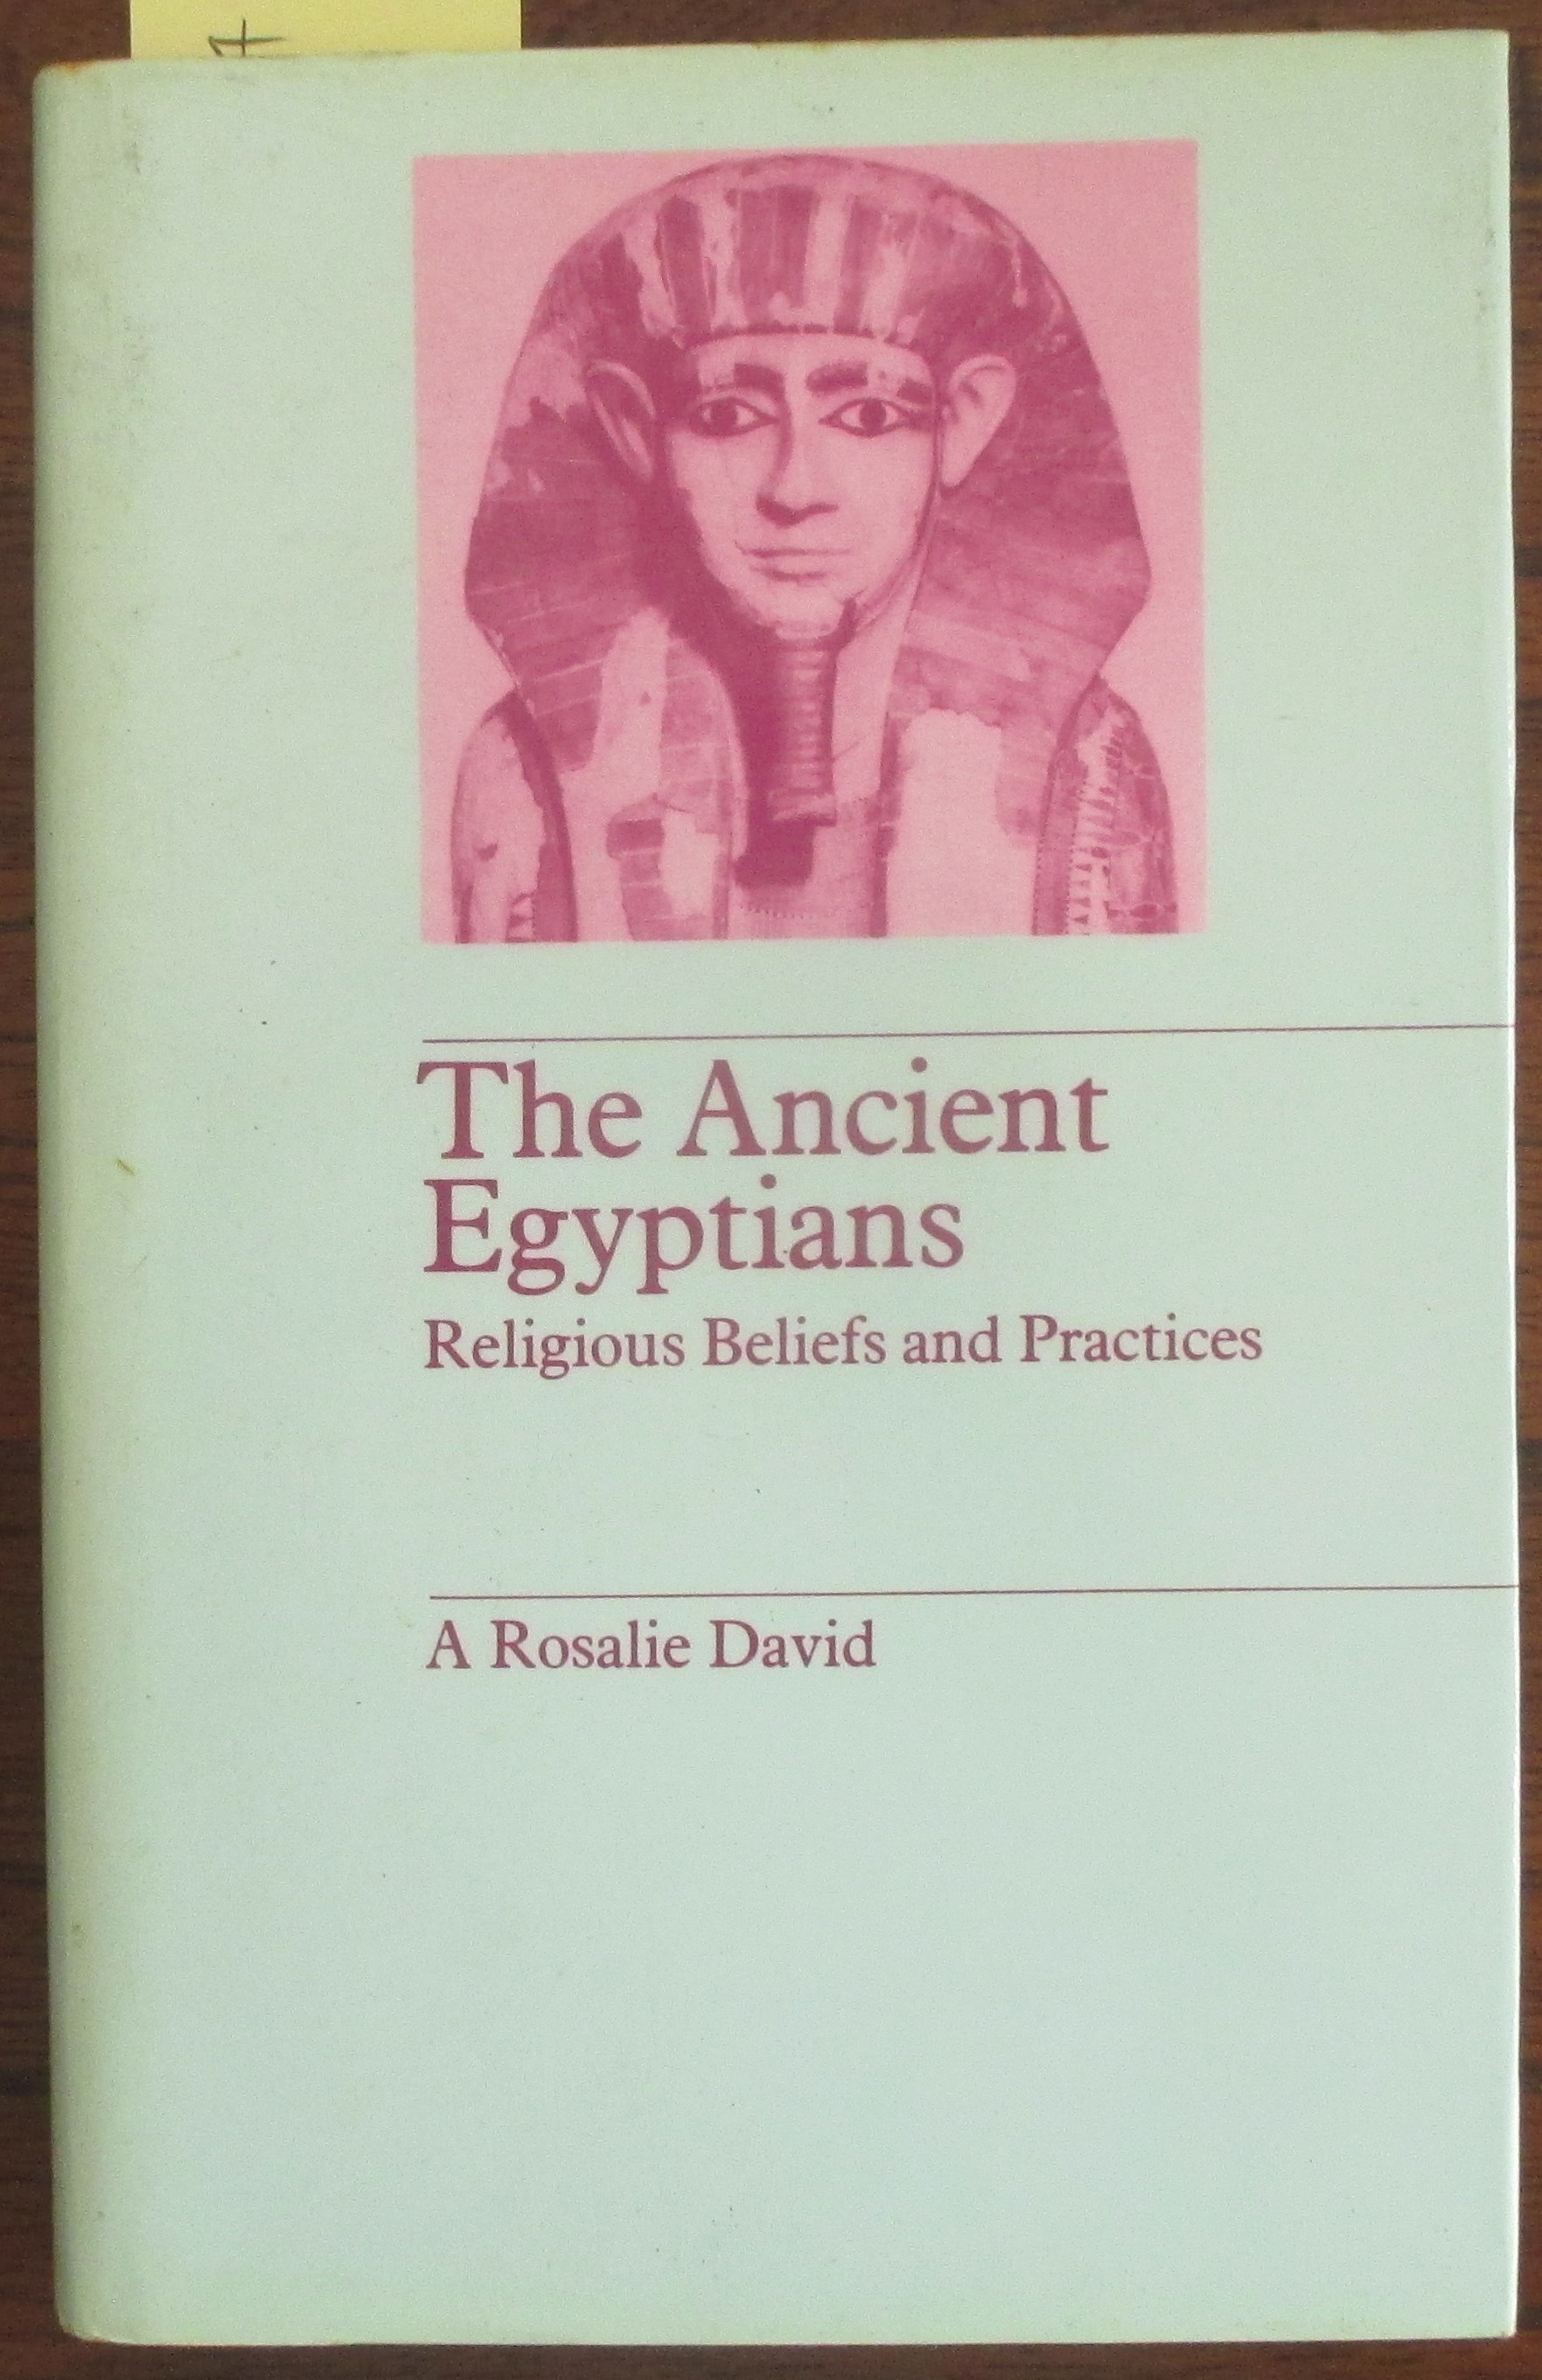 Ancient Egyptians, The: Religious Beliefs and Practices